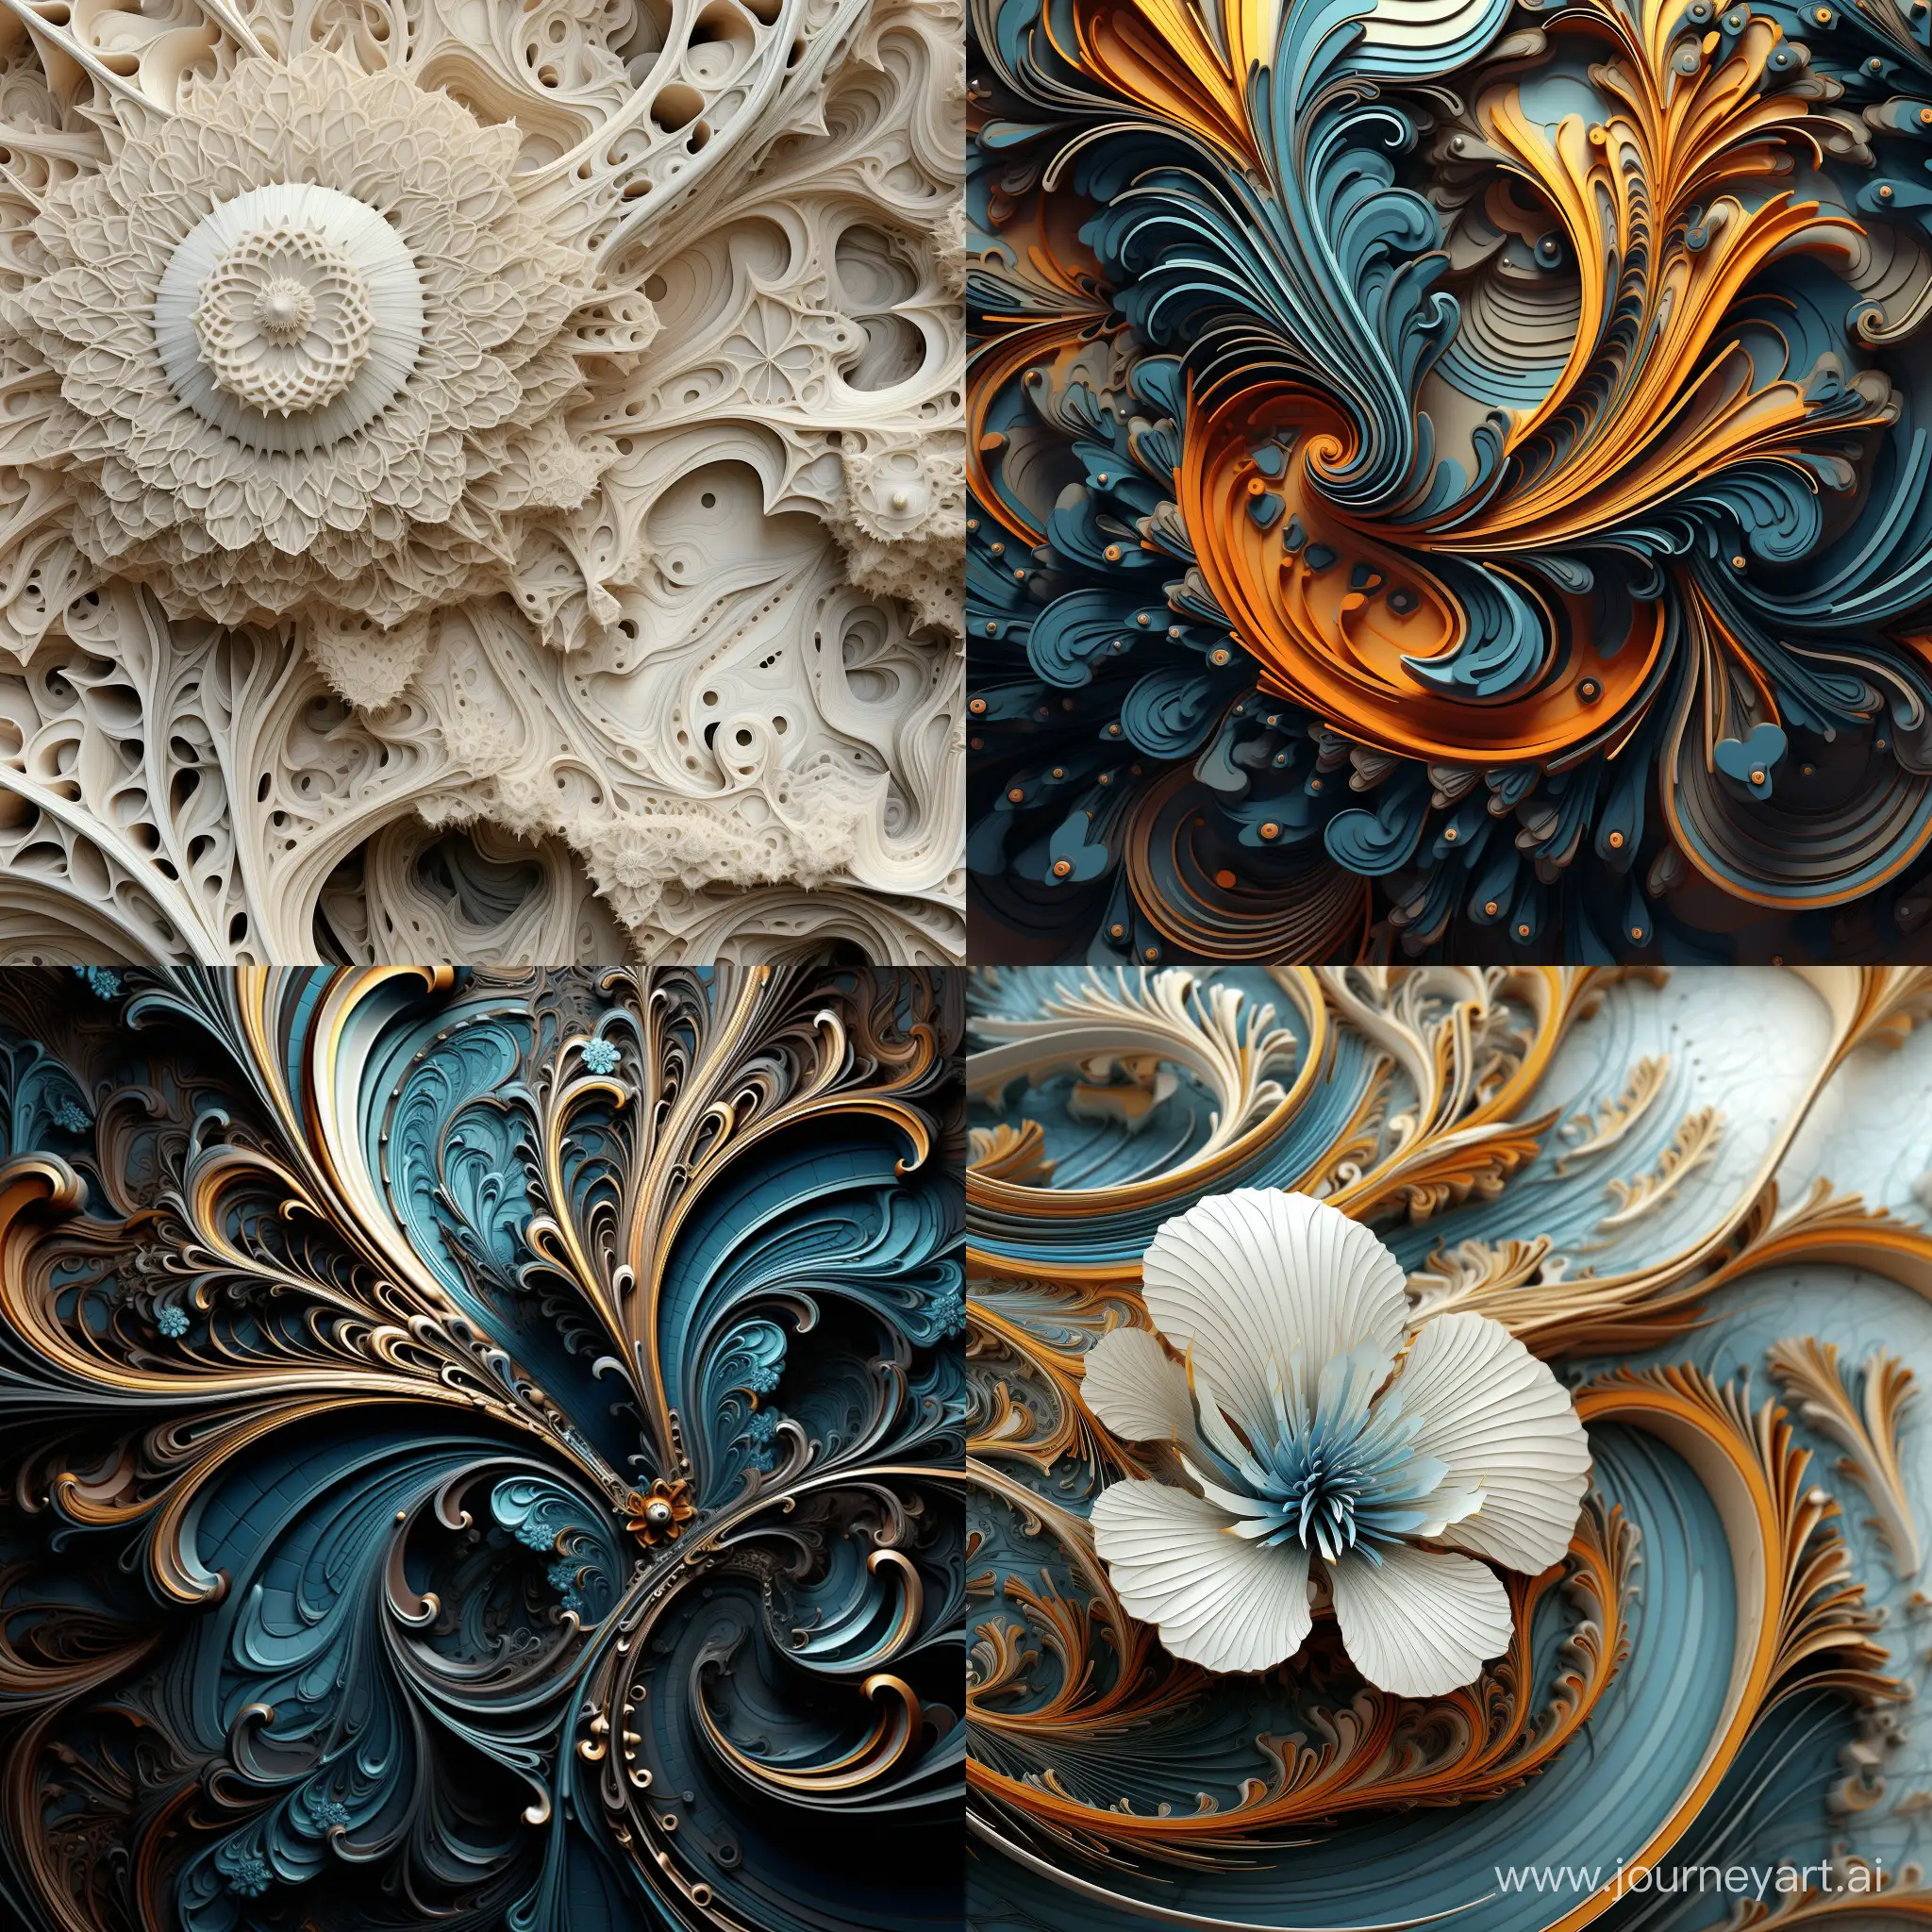 Mesmerizing-Fractal-Art-in-11-Aspect-Ratio-A-Stunning-Collection-of-99072-Unique-Patterns